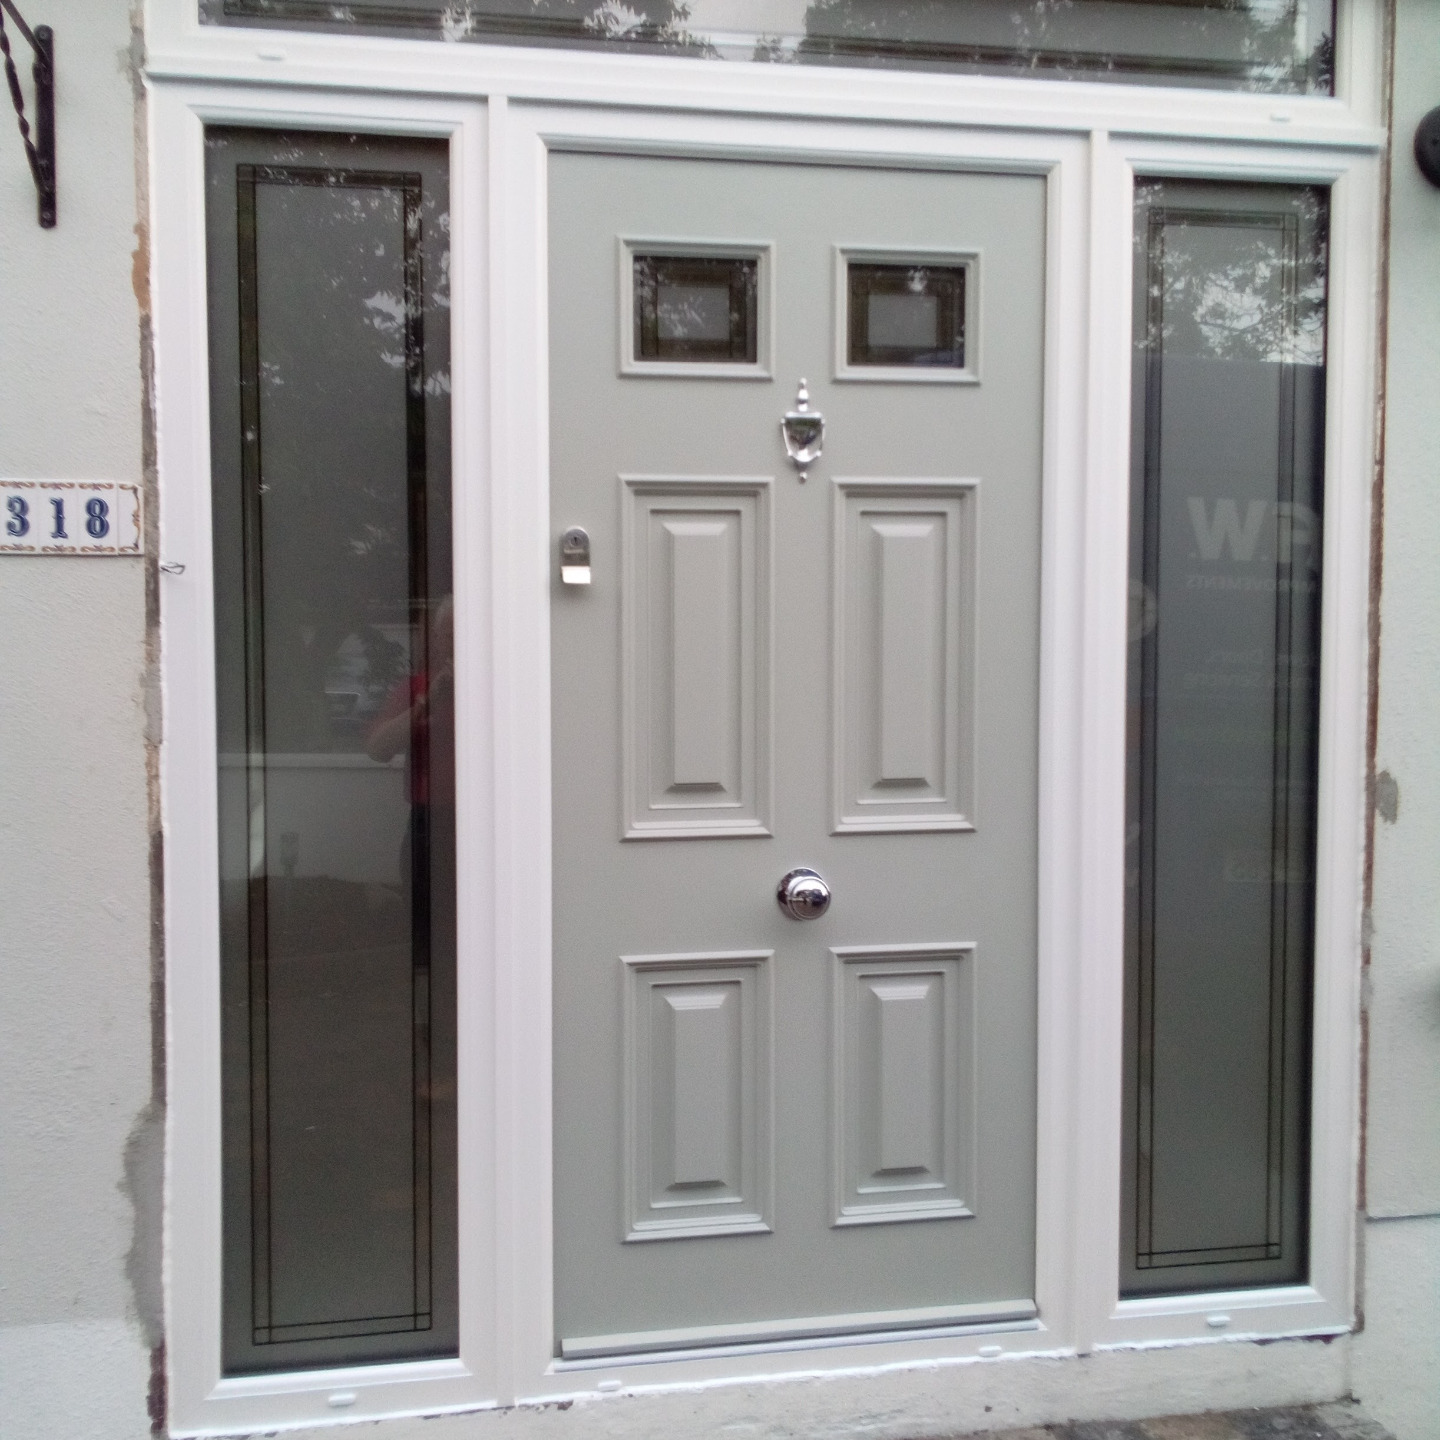 Composite Door in Agate Grey with White Frame. This work was done in Leixlip Co Kildare